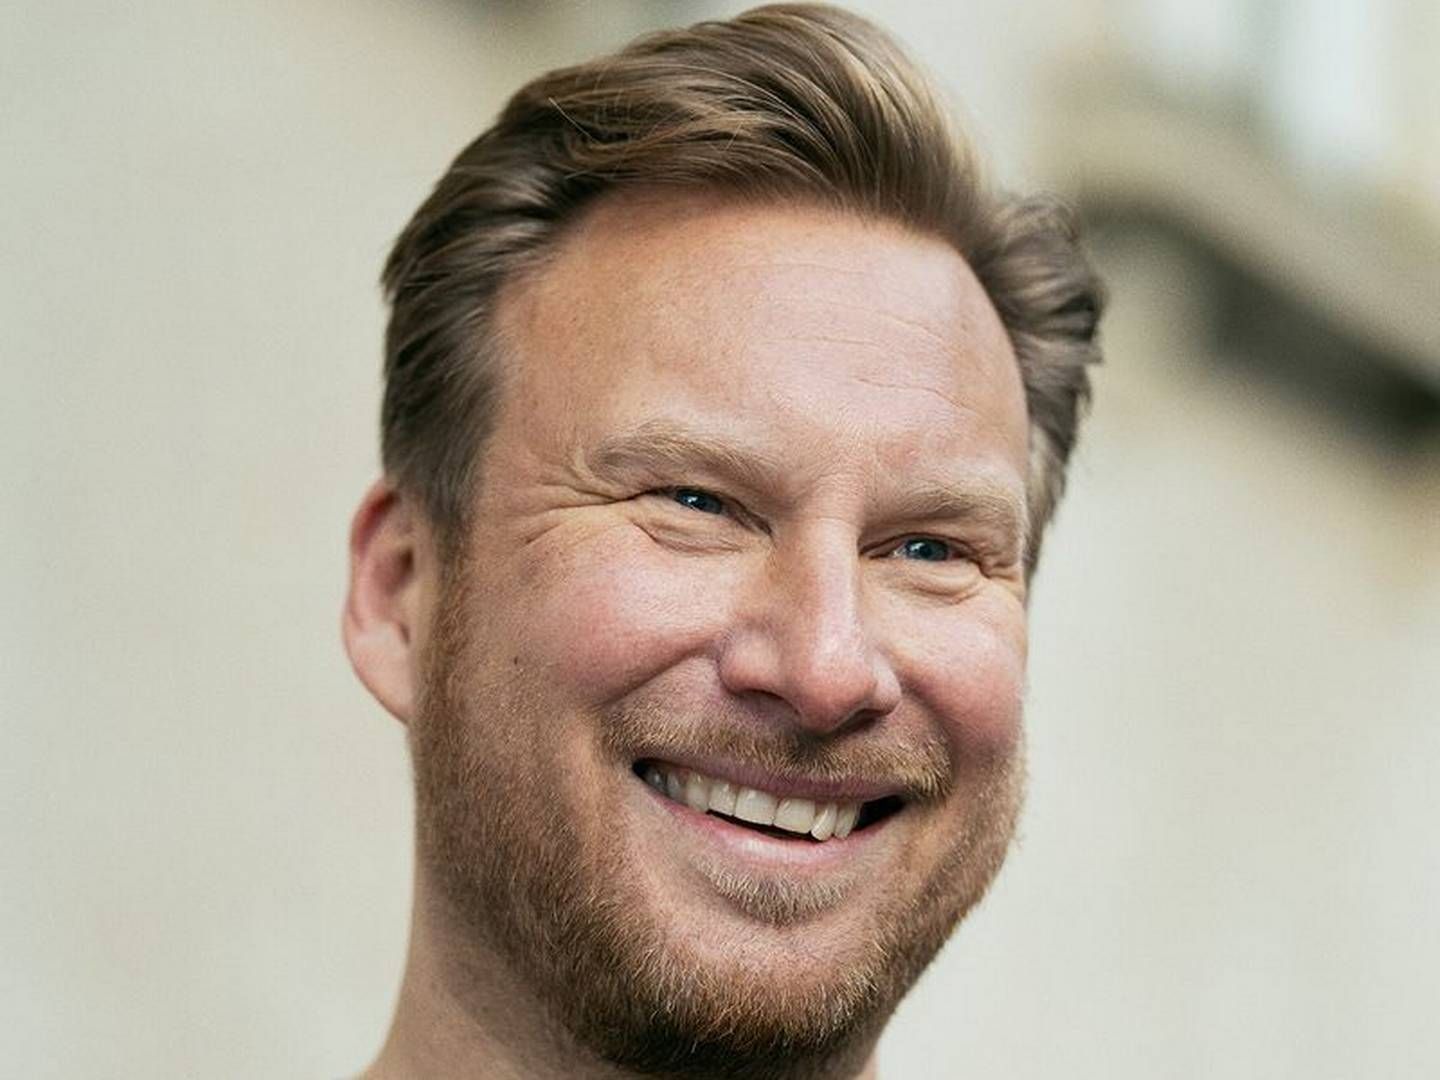 Christian Brøndum became managing partner on June 1, and has previously founded his own company. | Foto: Pr